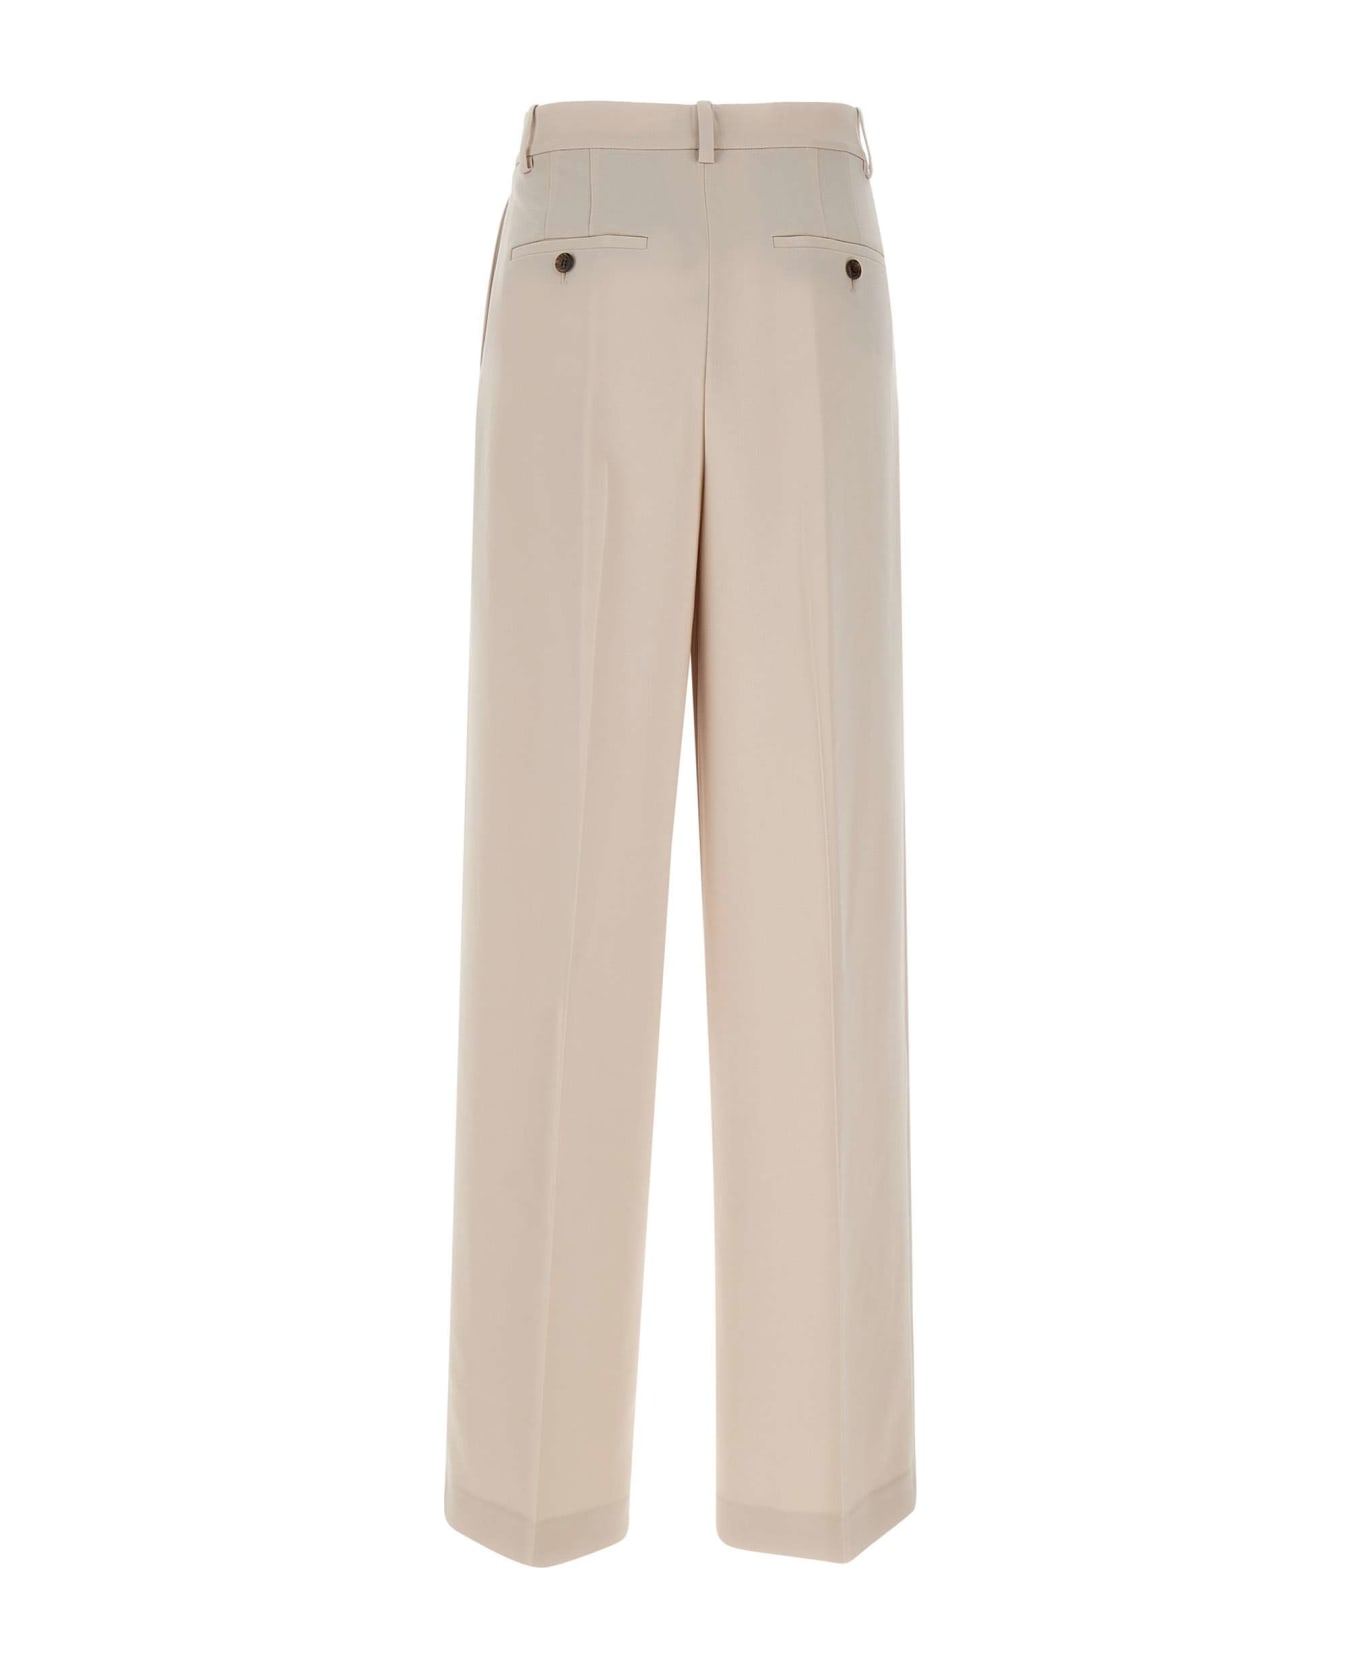 Theory "dbl Pleat" Trousers - BEIGE ボトムス